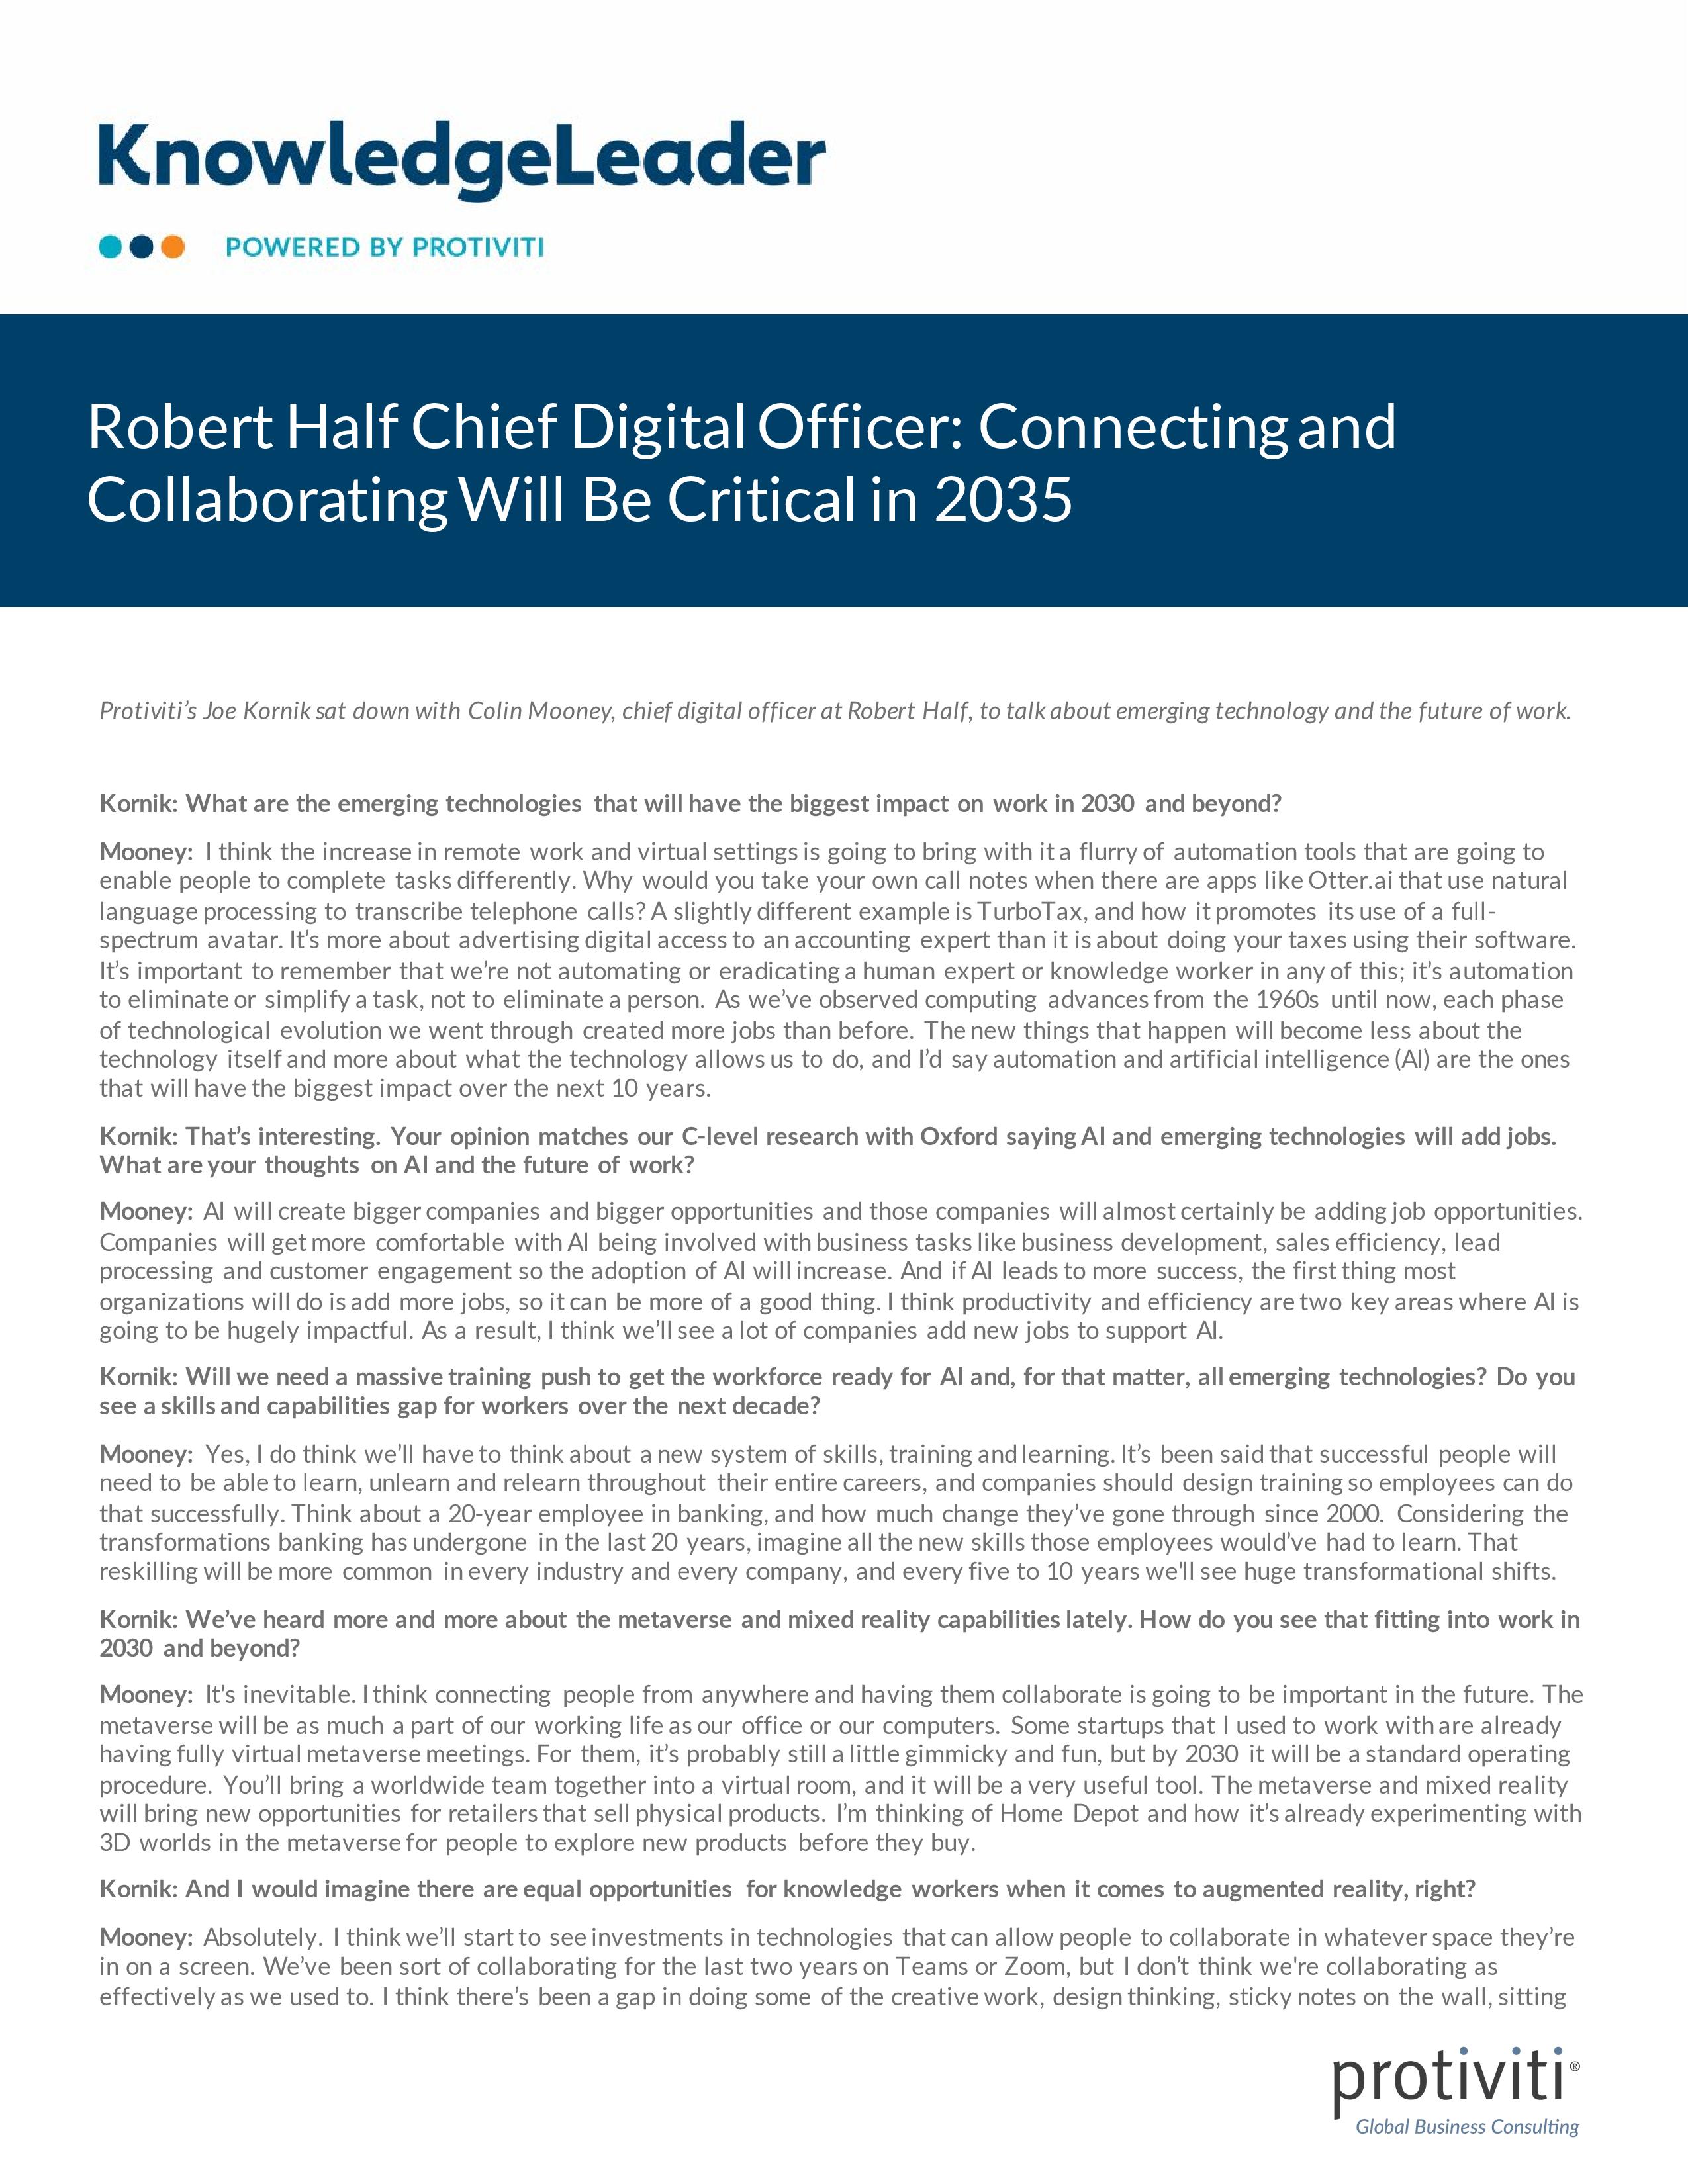 screenshot of the first page of Robert Half Chief Digital Officer Connecting and Collaborating Will Be Critical in 2035